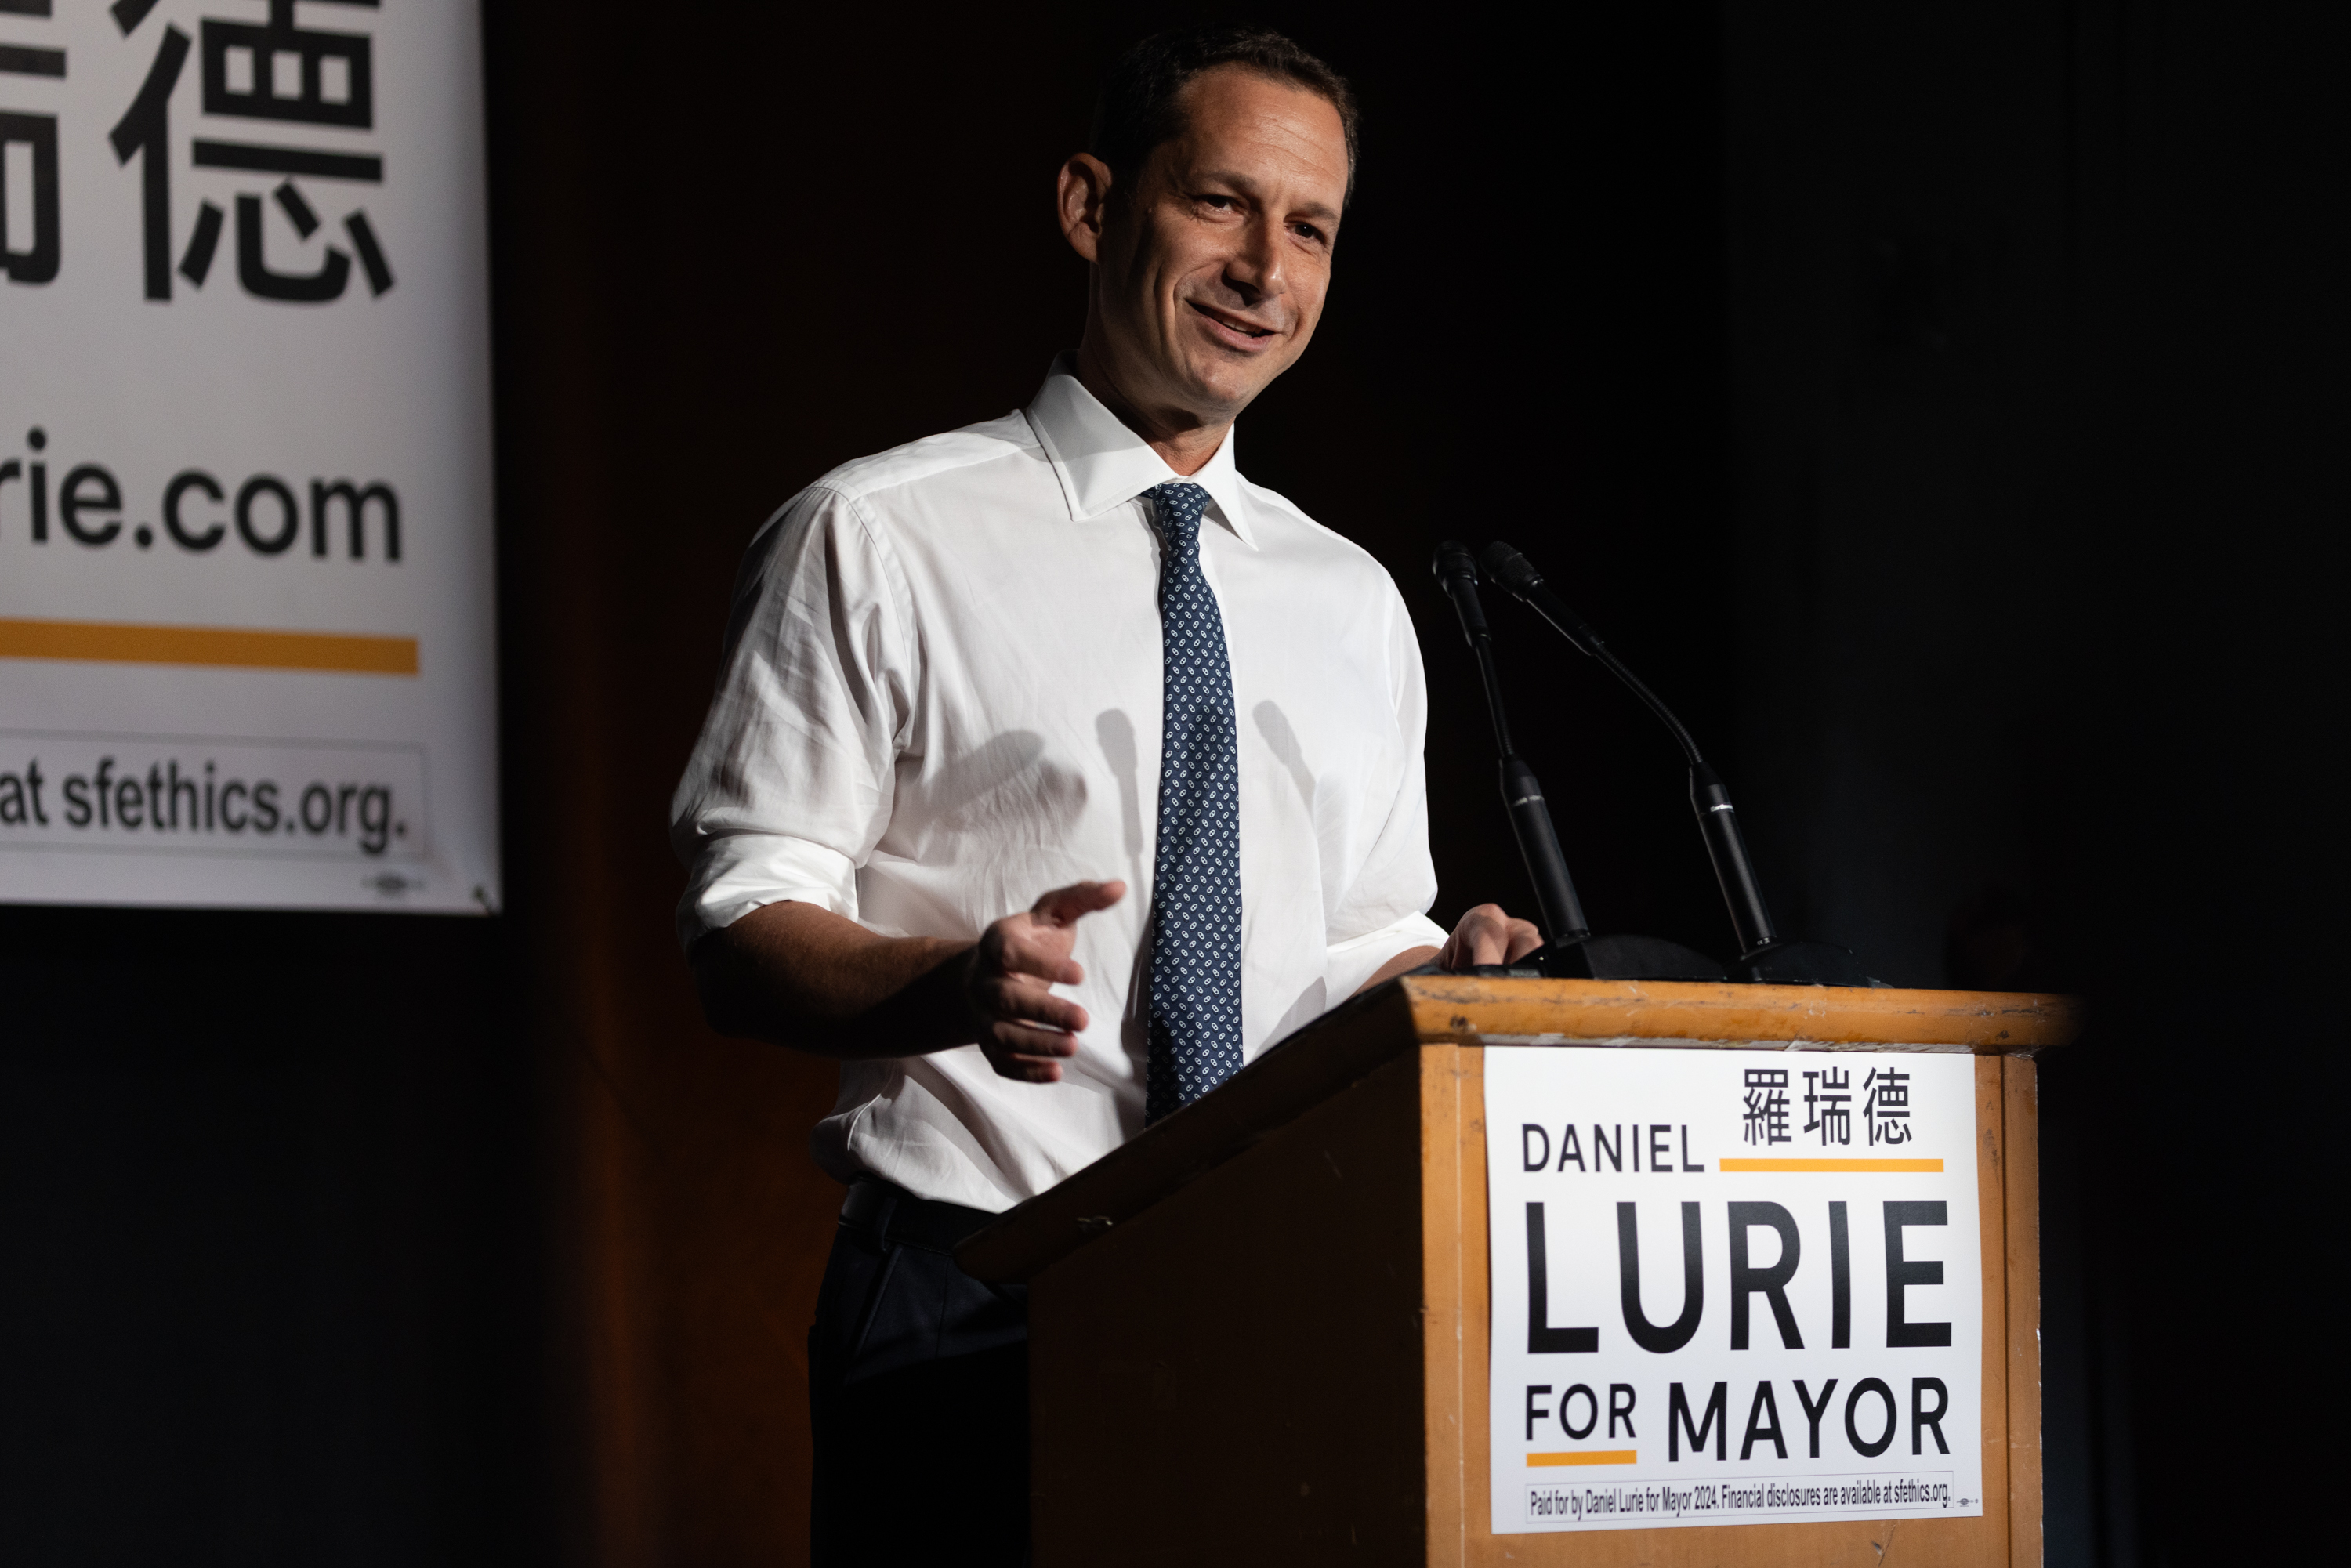 Daniel Lurie speaks at a podium with a &quot;Daniel Lurie for Mayor&quot; sign.